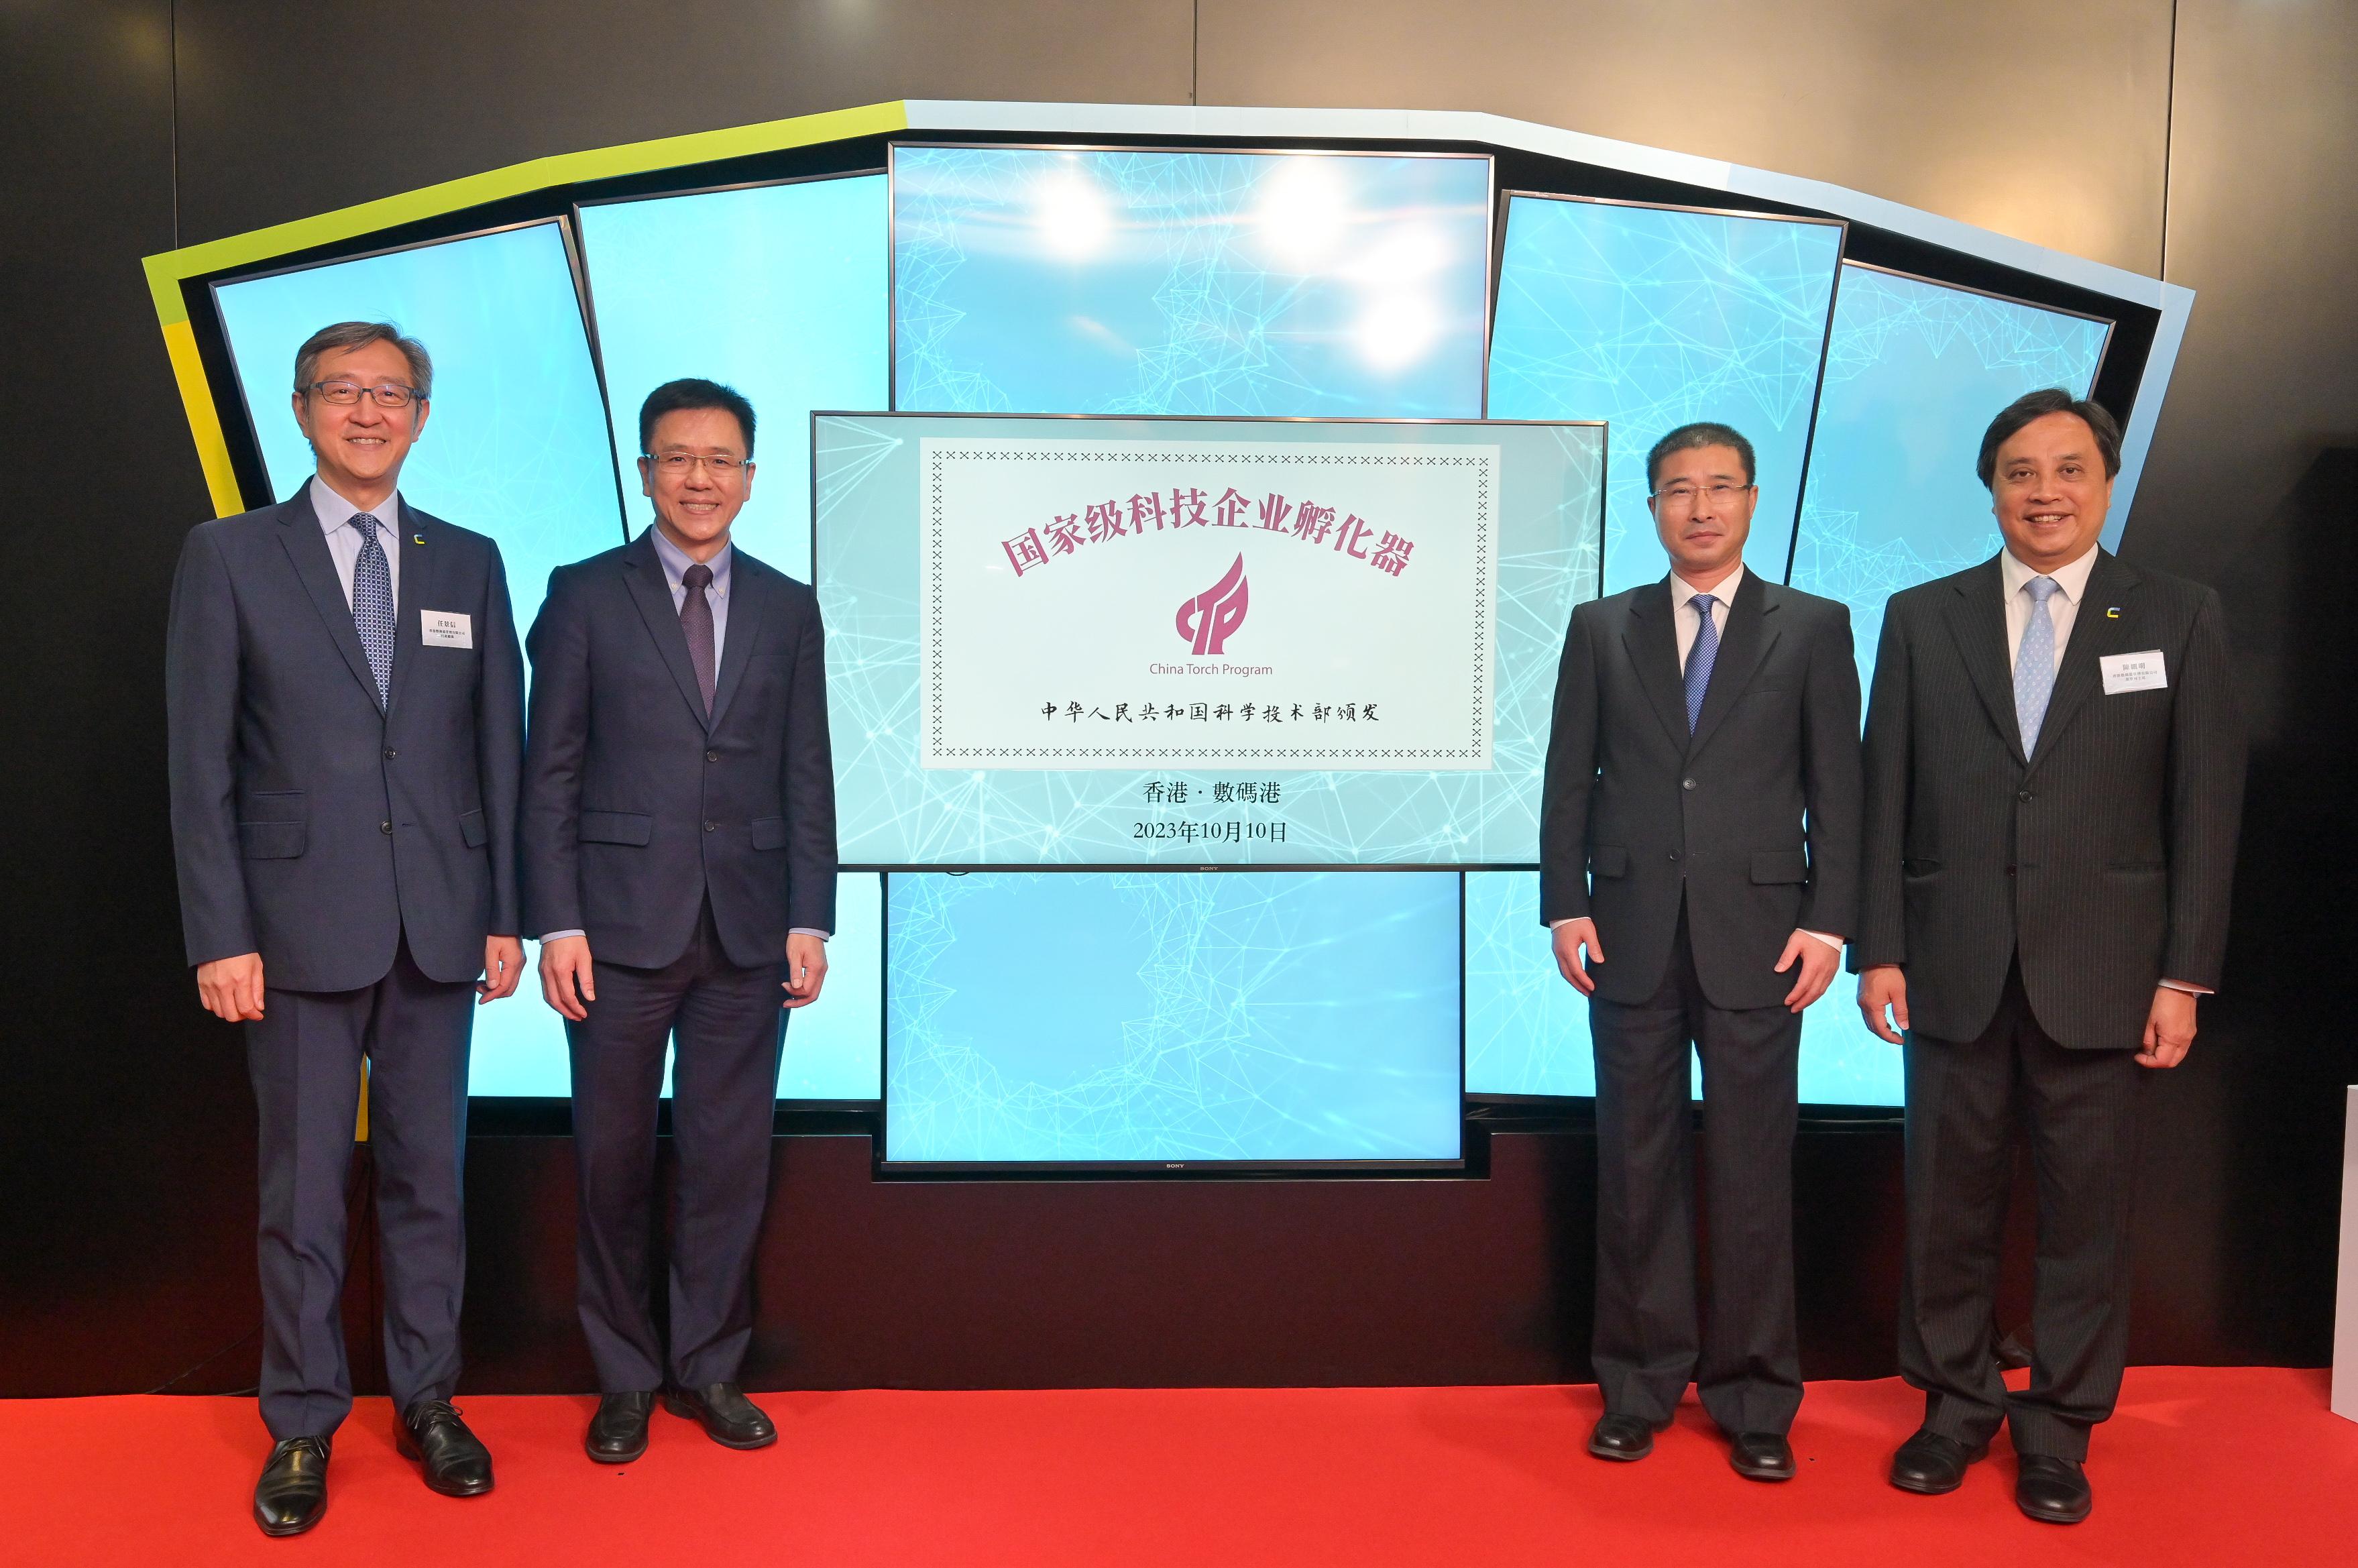 The Secretary for Innovation, Technology and Industry, Professor Sun Dong (second left); Vice Minister of Science and Technology Professor Zhang Guangjun (second right); the Chairman of the Board of Directors of the Hong Kong Cyberport Management Company Limited (HKCMCL), Mr Simon Chan (first right); and the Chief Executive Officer of the HKCMCL, Mr Peter Yan (first left), officiate at the plaque unveiling ceremony today (October 10) to mark the HKCMCL being formally awarded as a State-level Scientific and Technological Enterprise Incubator by the Ministry of Science and Technology.